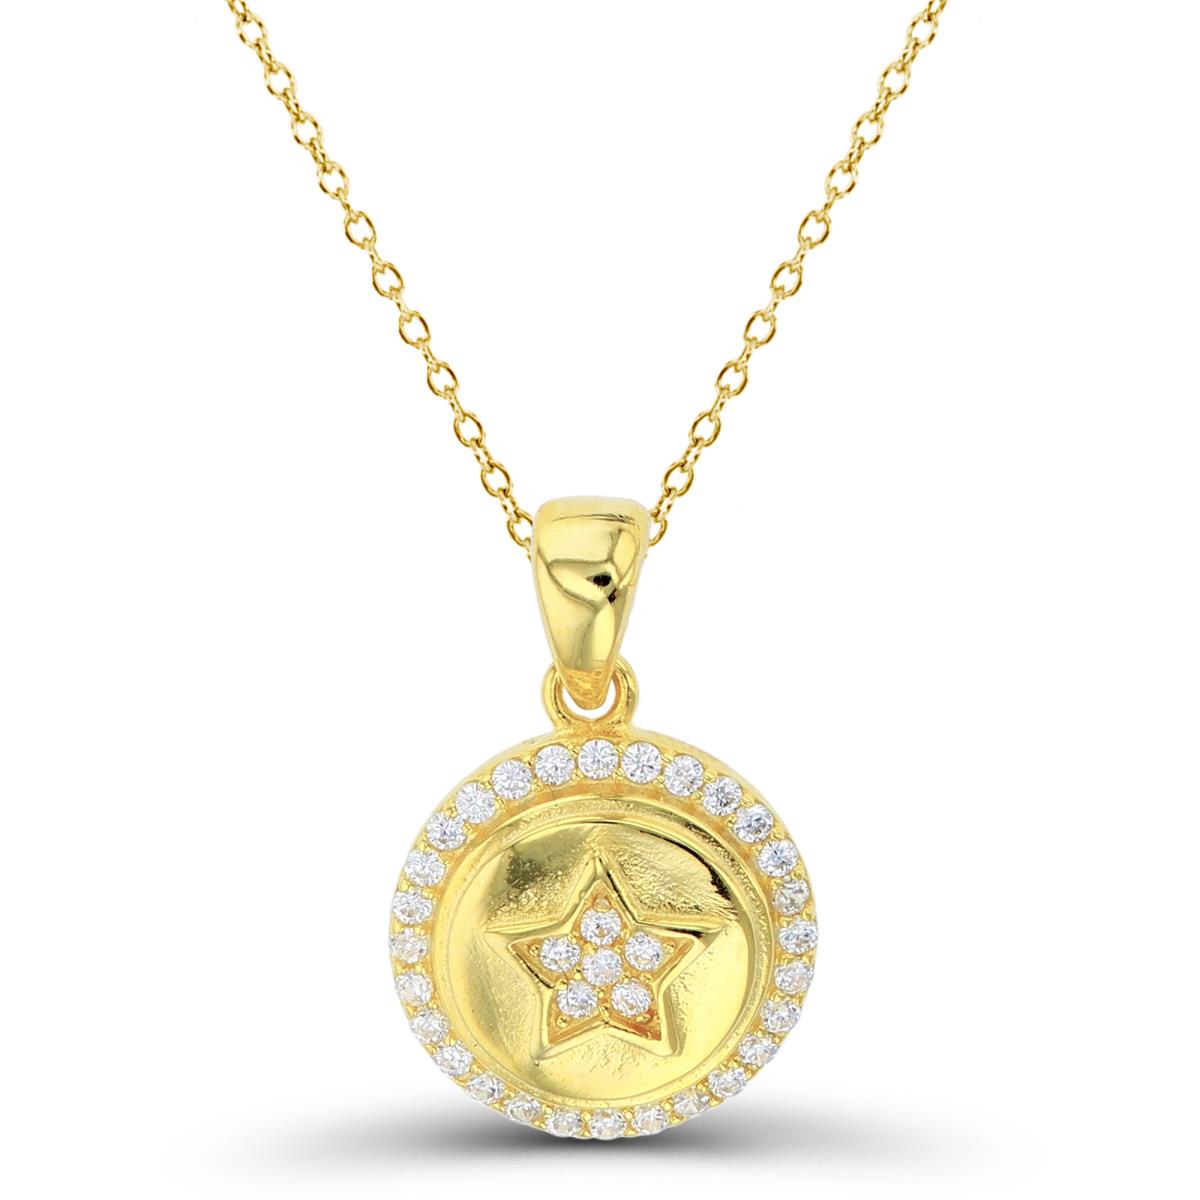 Sterling Silver+1Micron Yellow Gold Rnd White CZ Star on High Polish Puffy Circle 18"Necklace